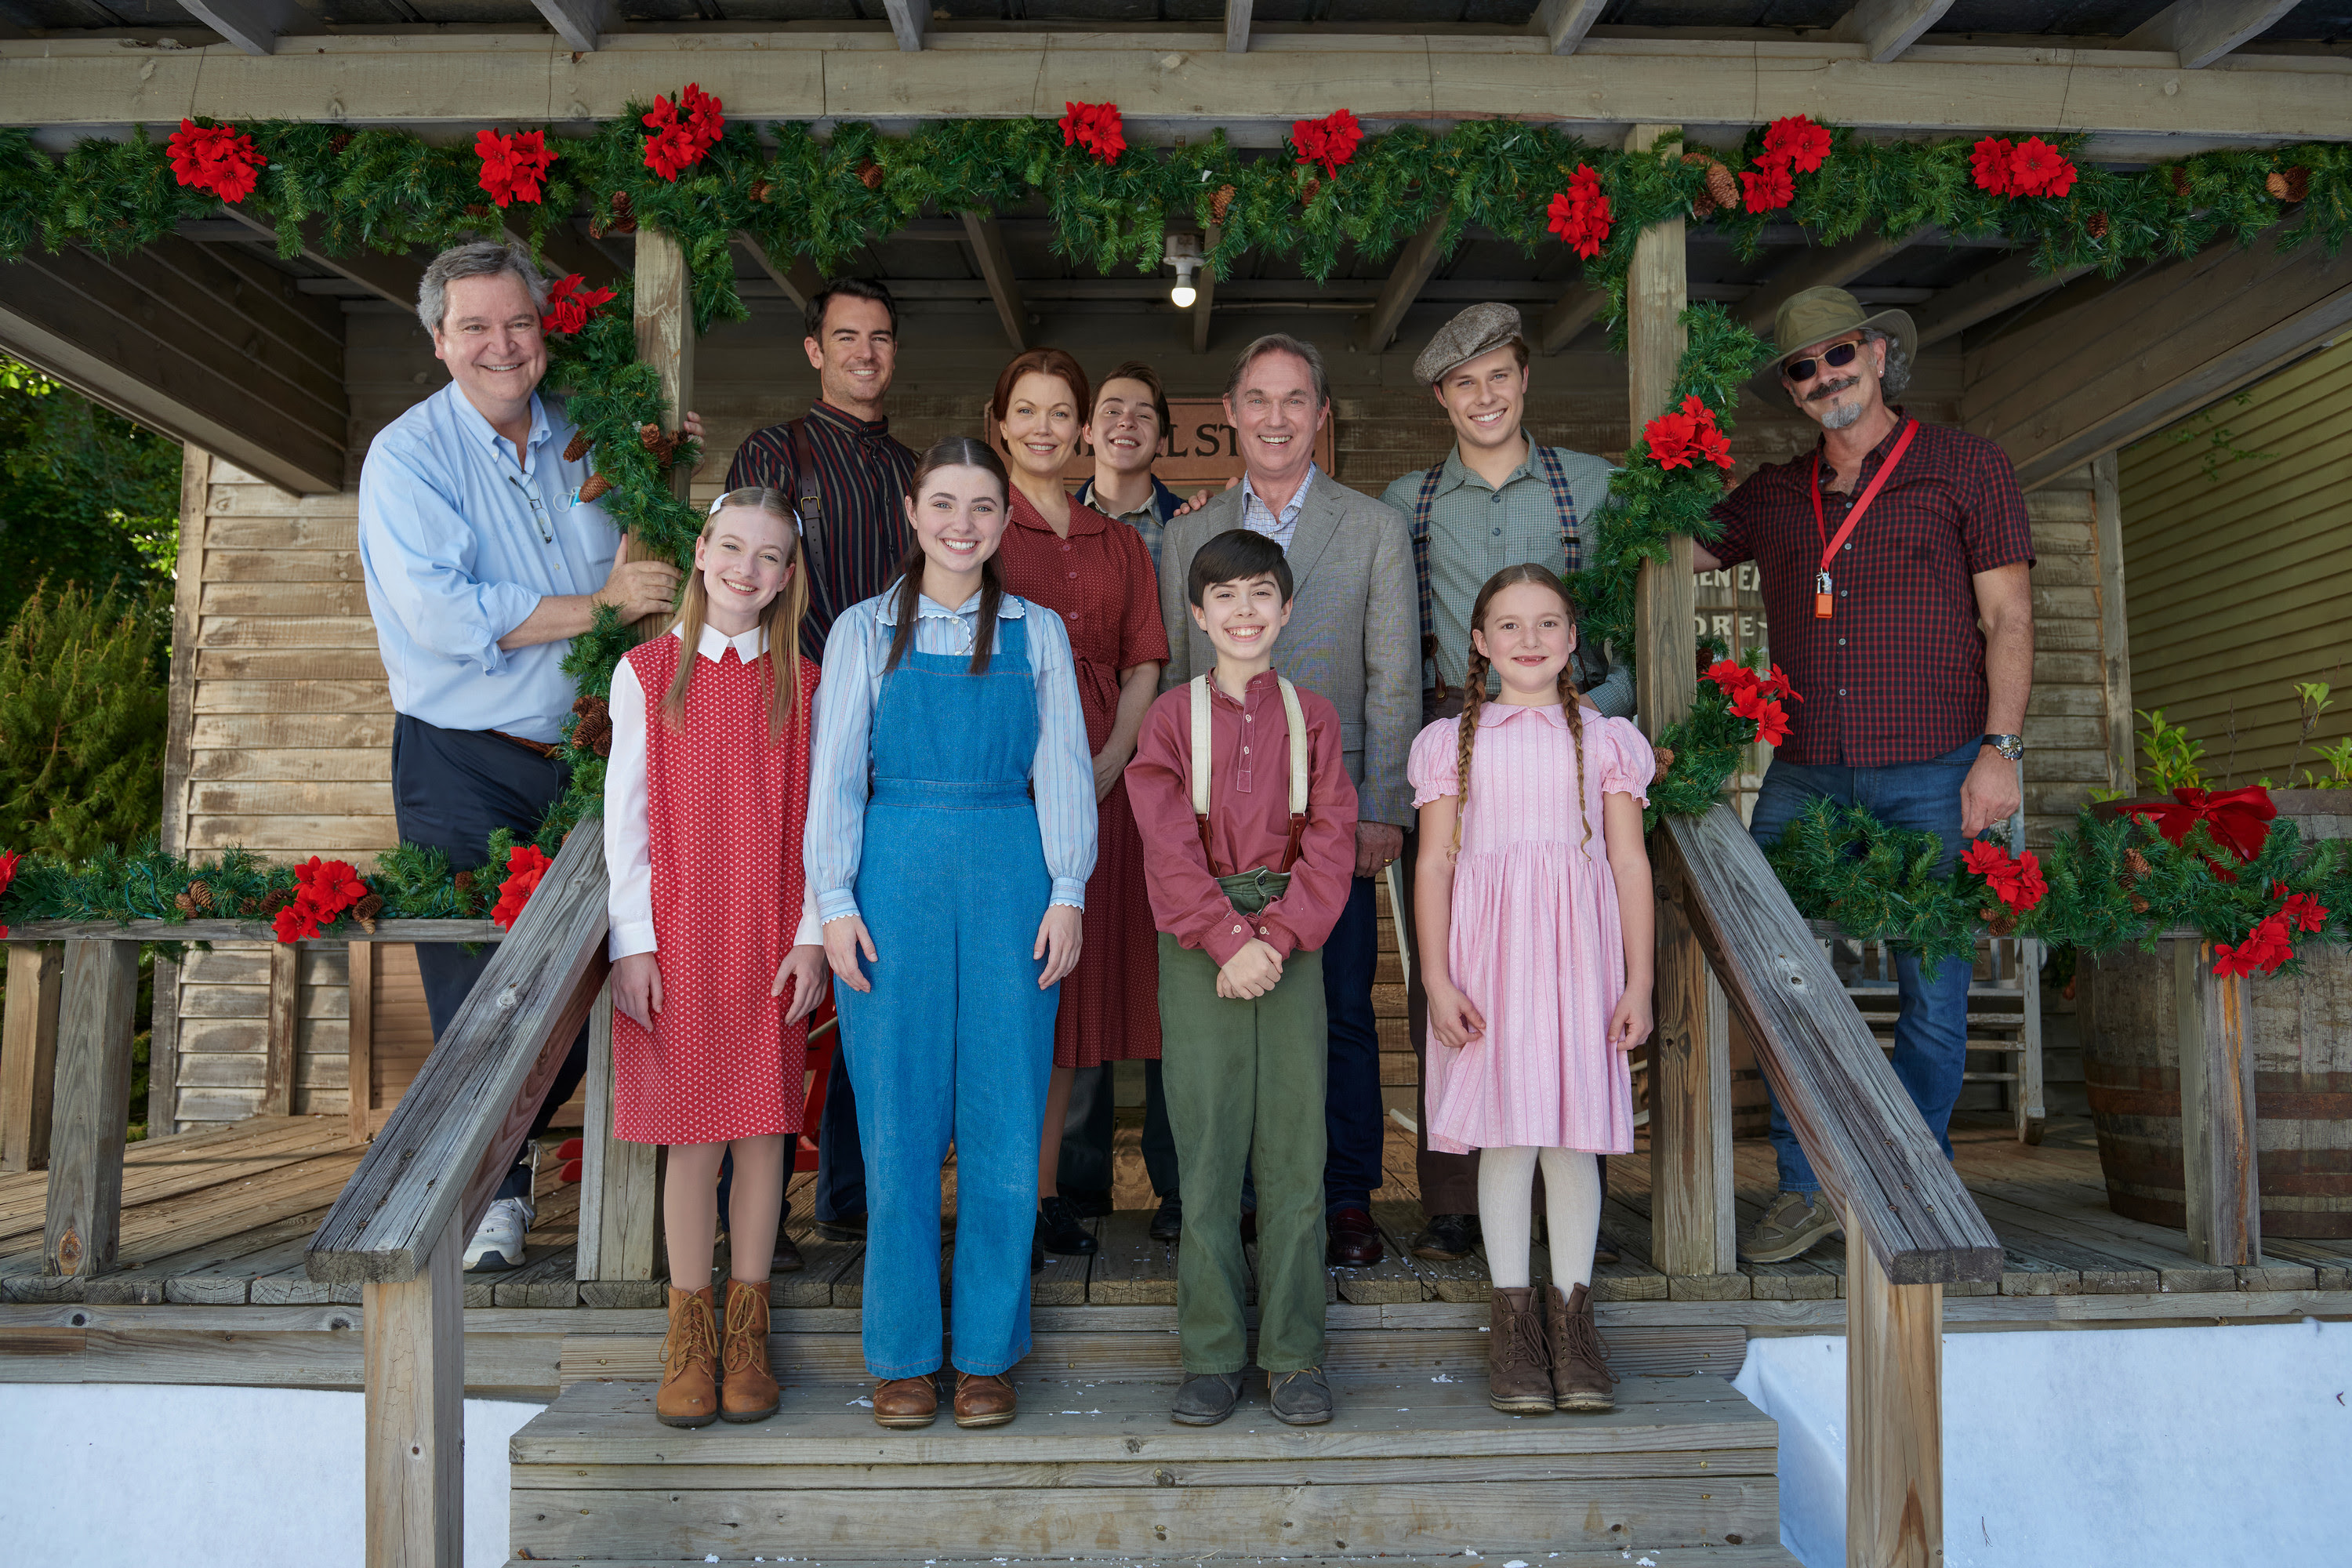 The Waltons: Homecoming' on the CW brings back a 1970s classic family drama